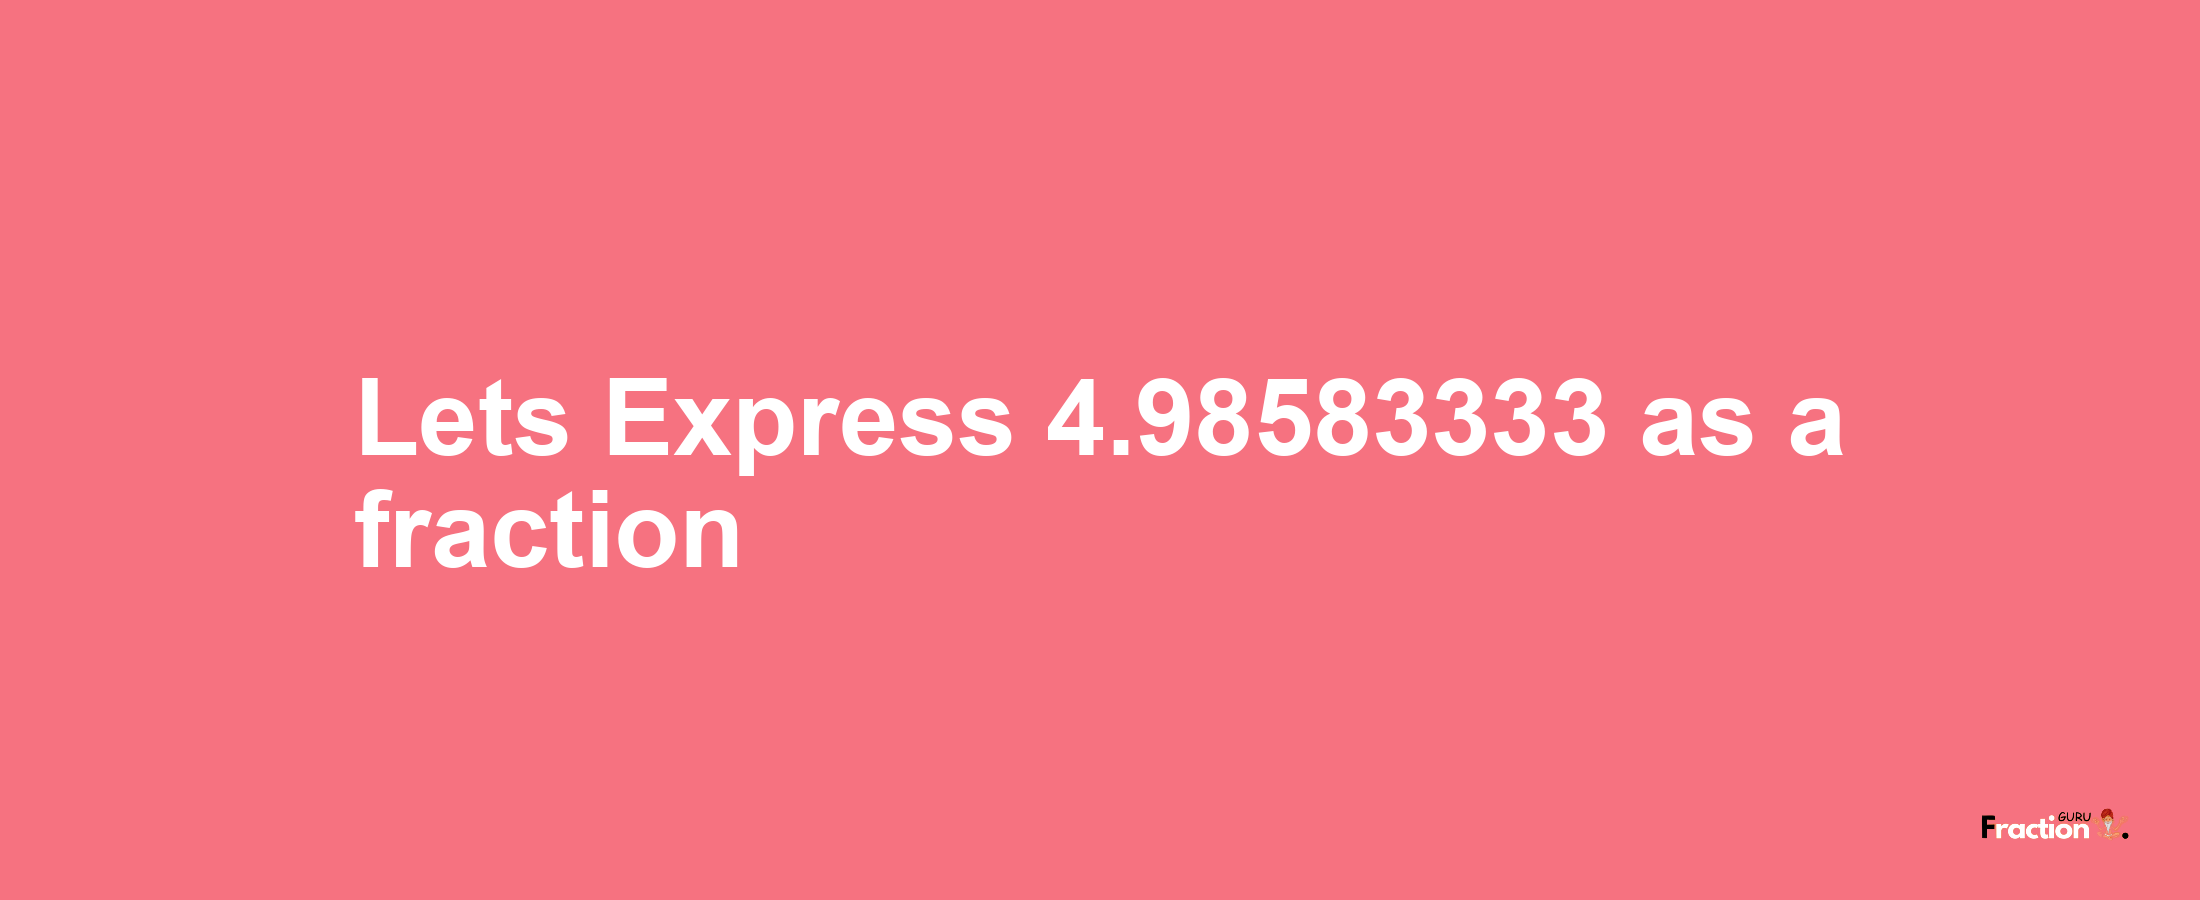 Lets Express 4.98583333 as afraction